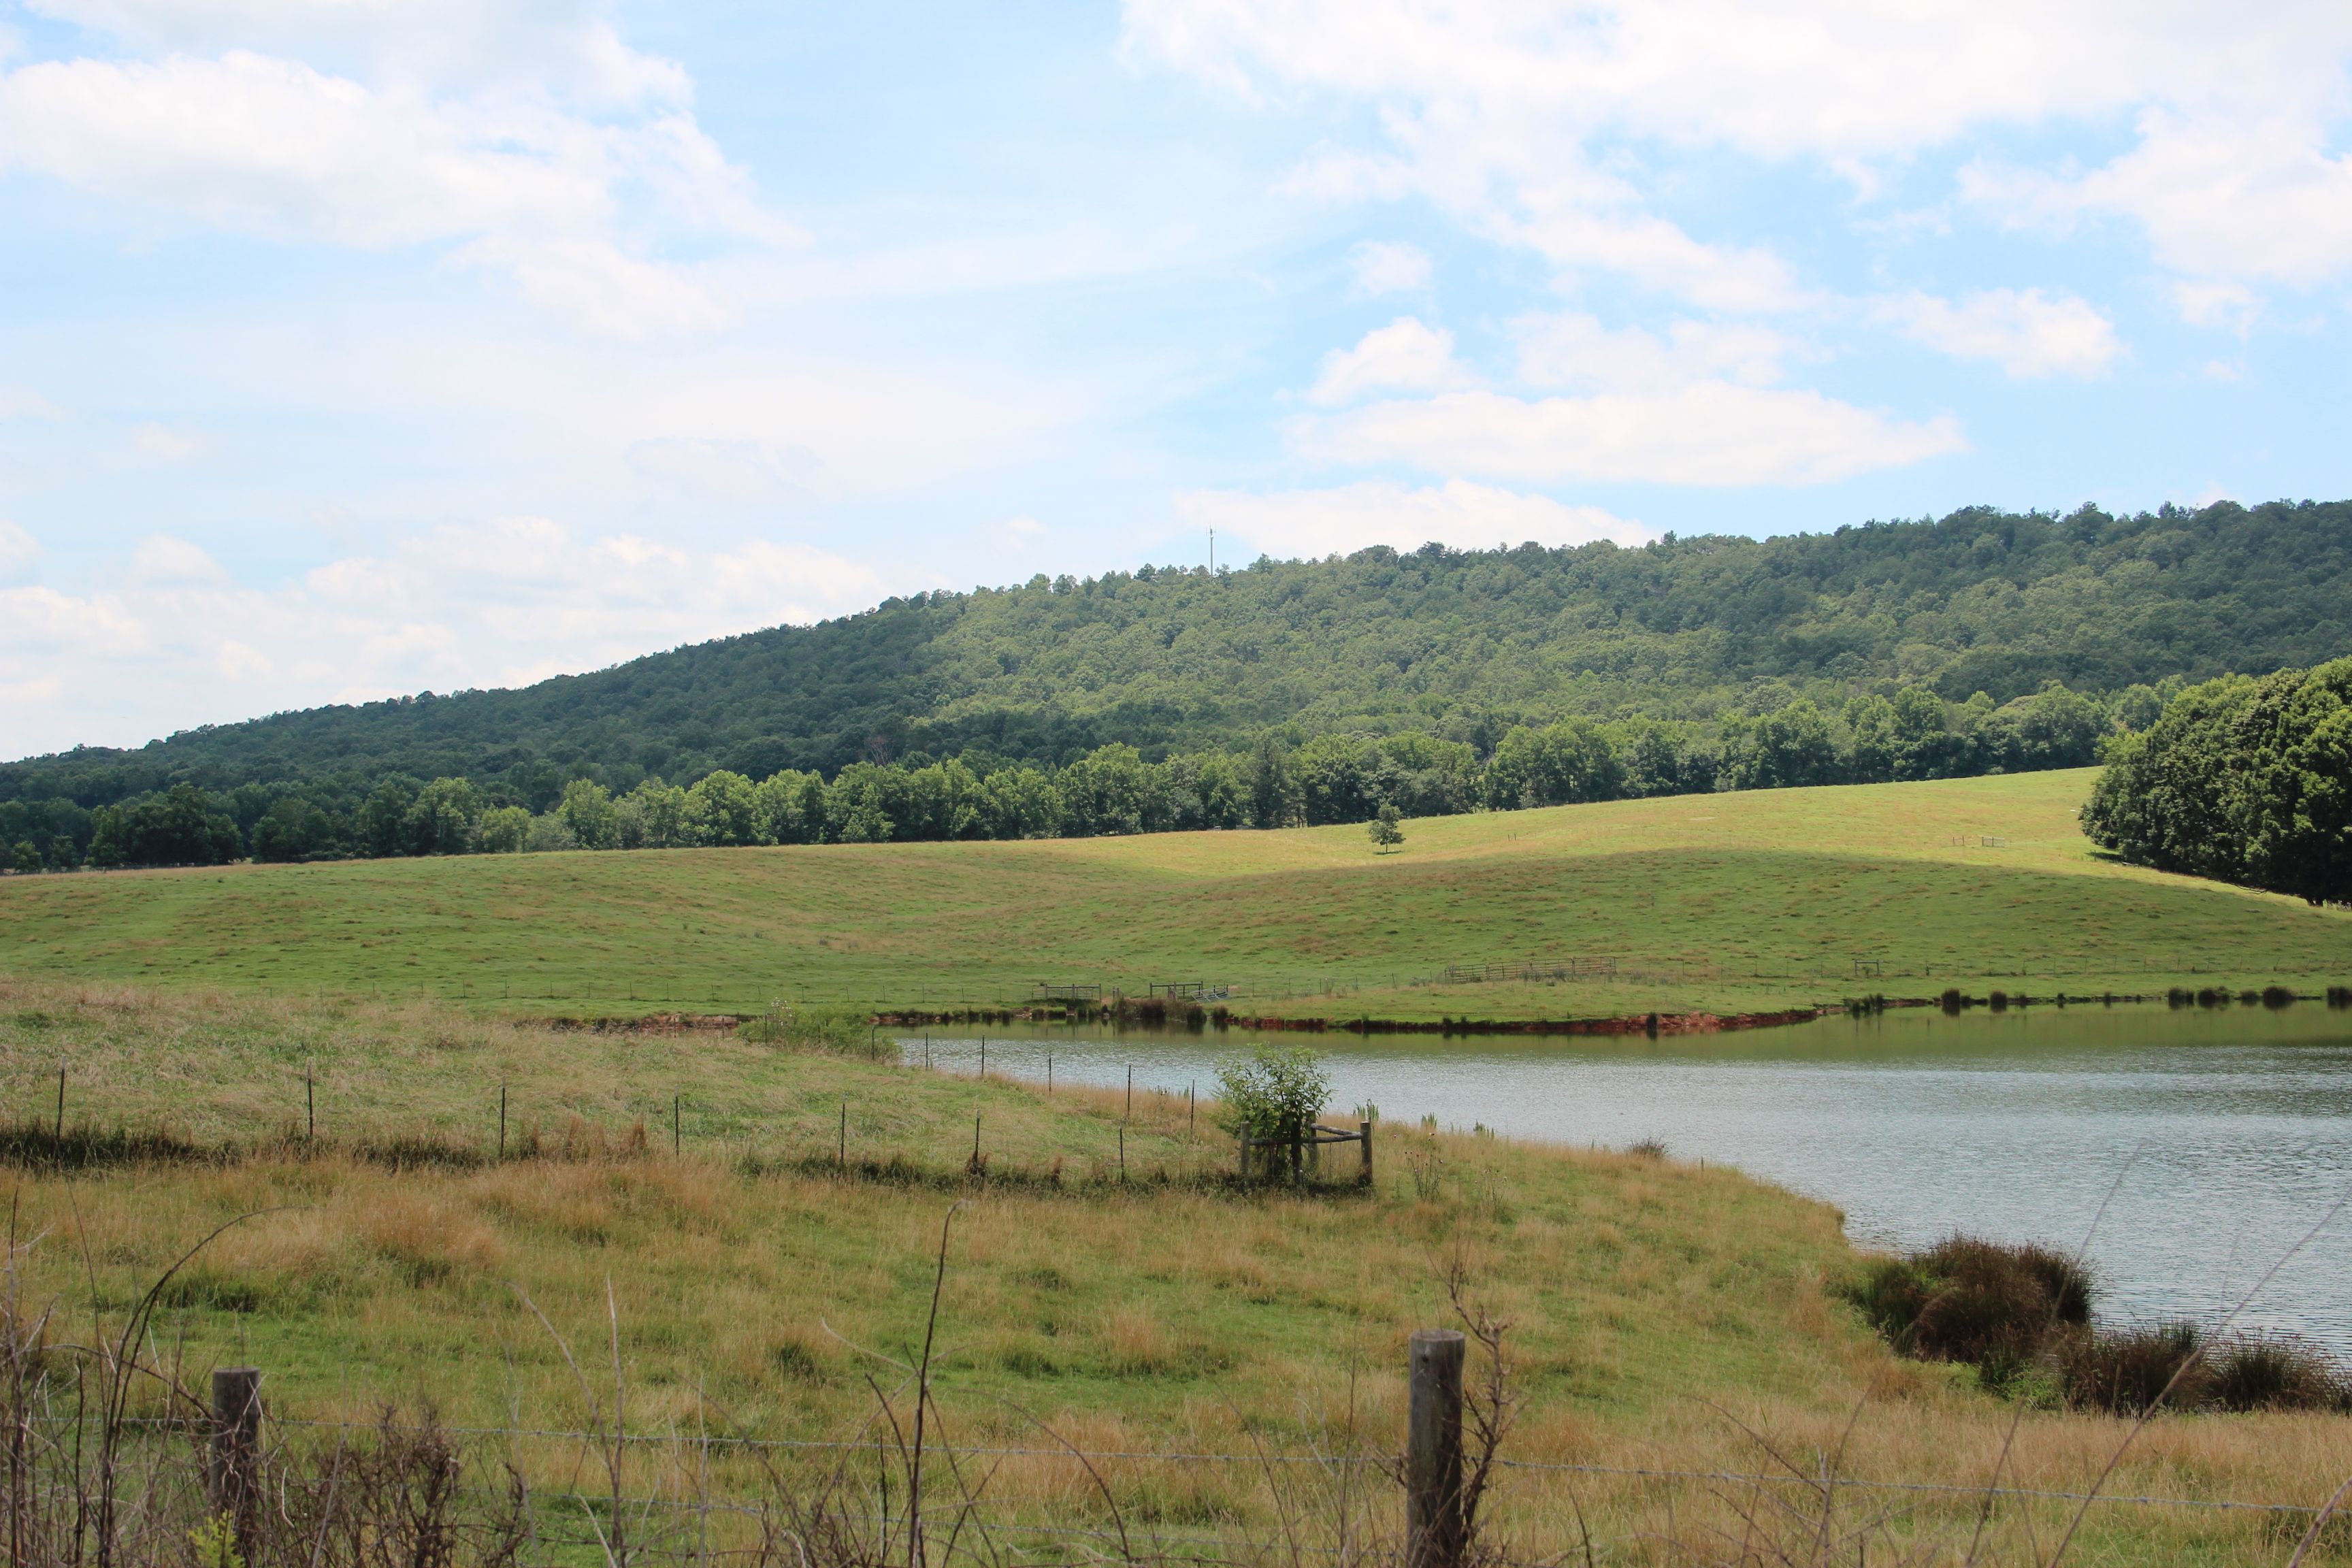 Blackjack Mountain in Carroll County, Georgia, on a partly cloudy day with a pond in the foreground